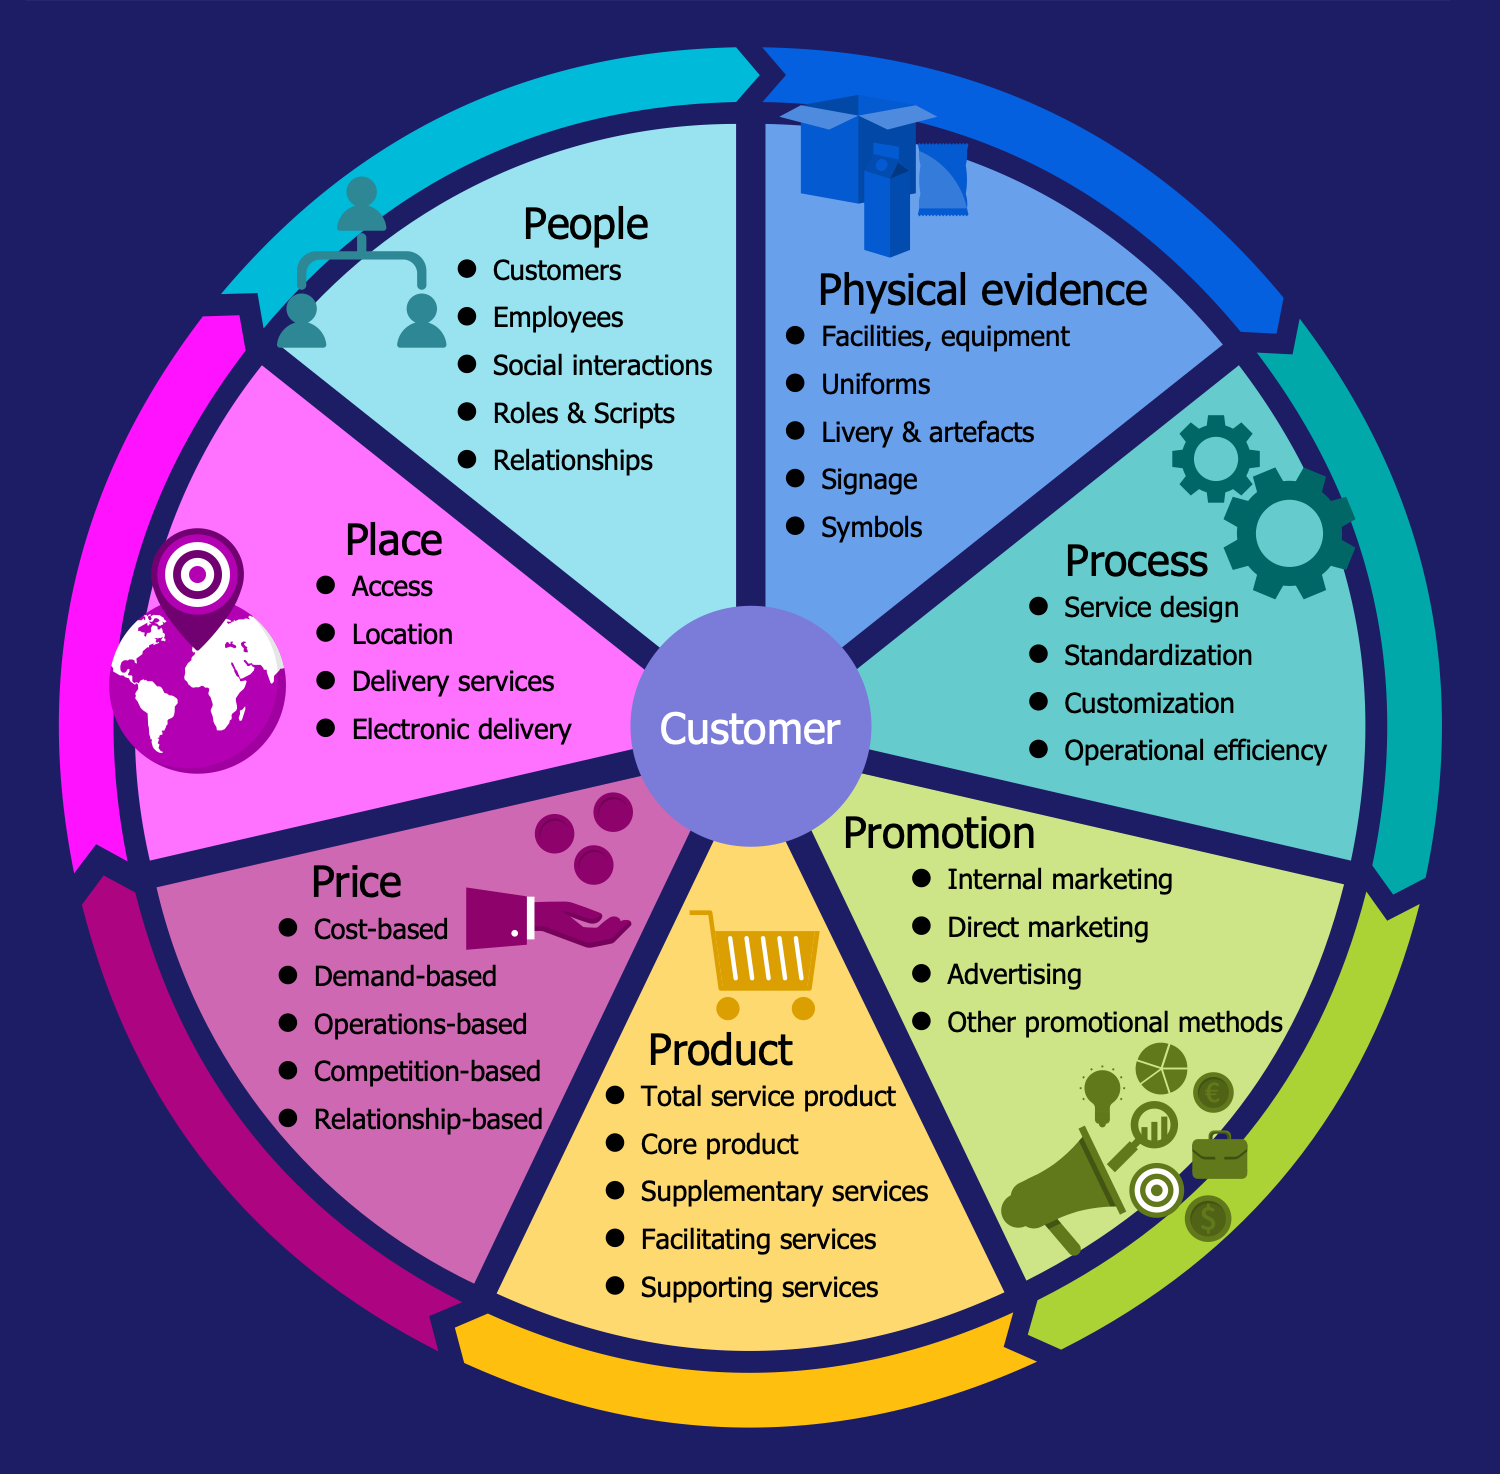 7 Ps of Services Marketing